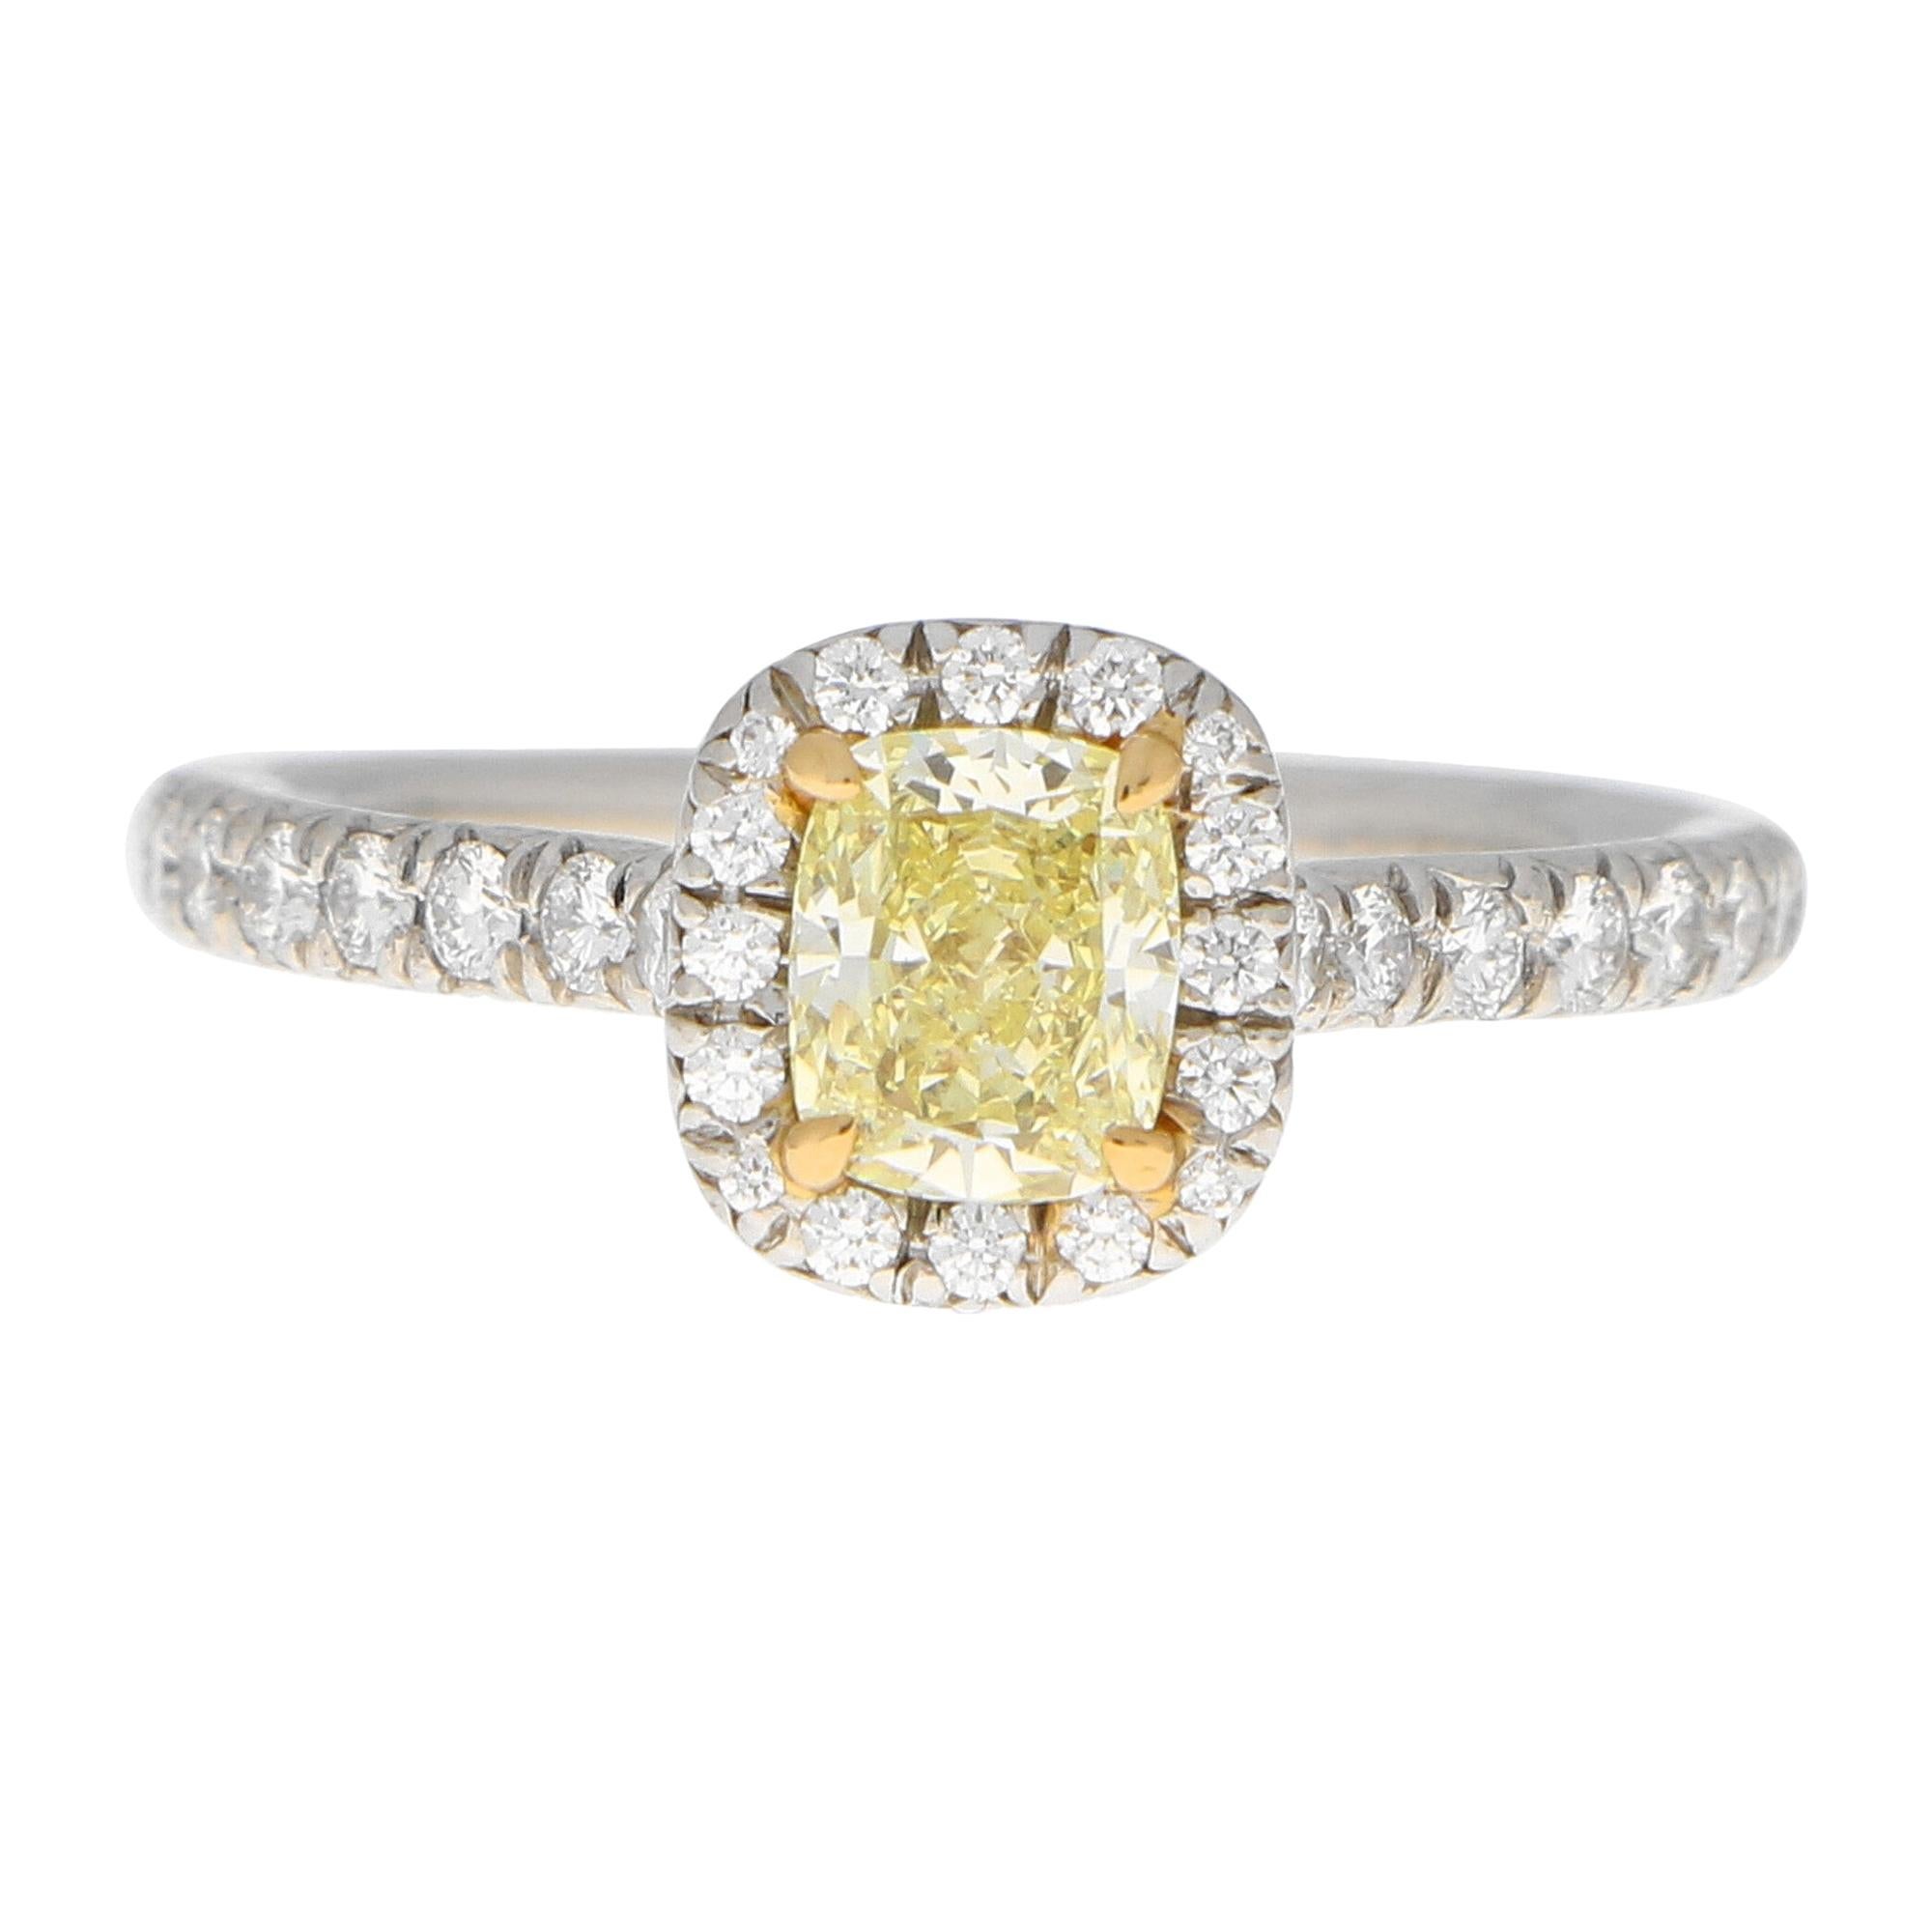 Tiffany & Co 'Soleste' Fancy Yellow Diamond Engagement Ring in Platinum and Gold